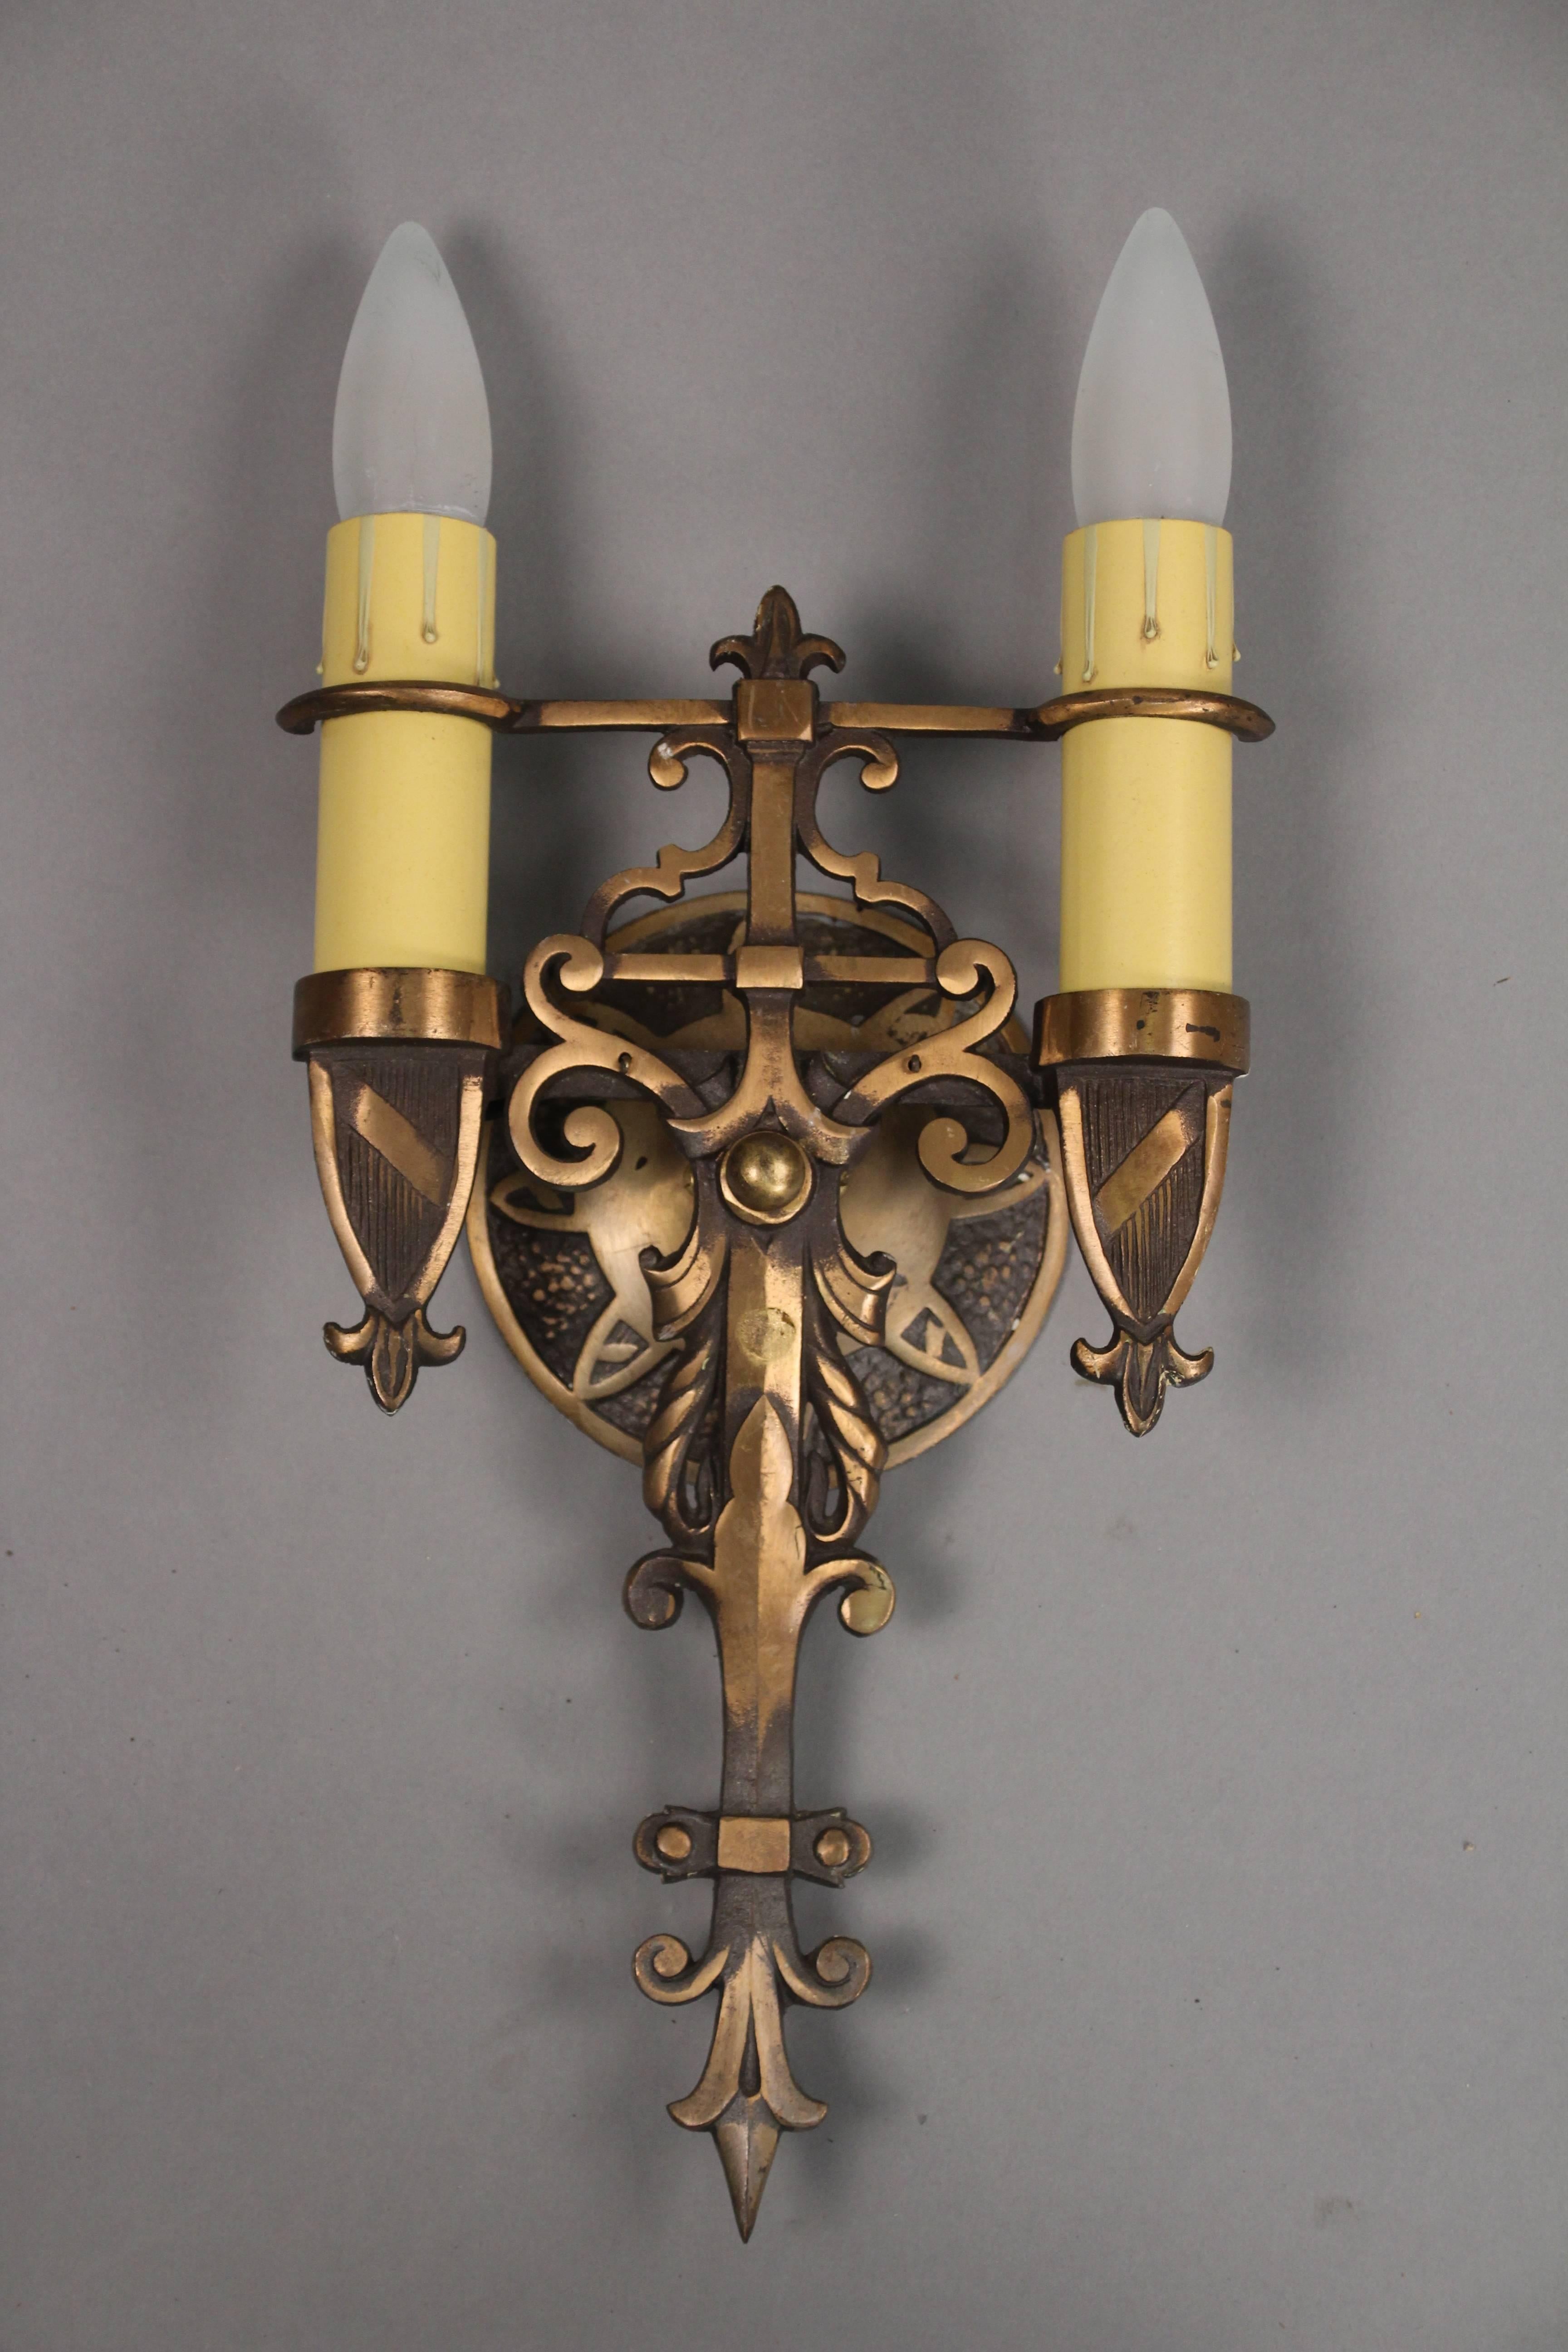 Pair of nice double sconces with shield motif, circa 1920s. Original finish.